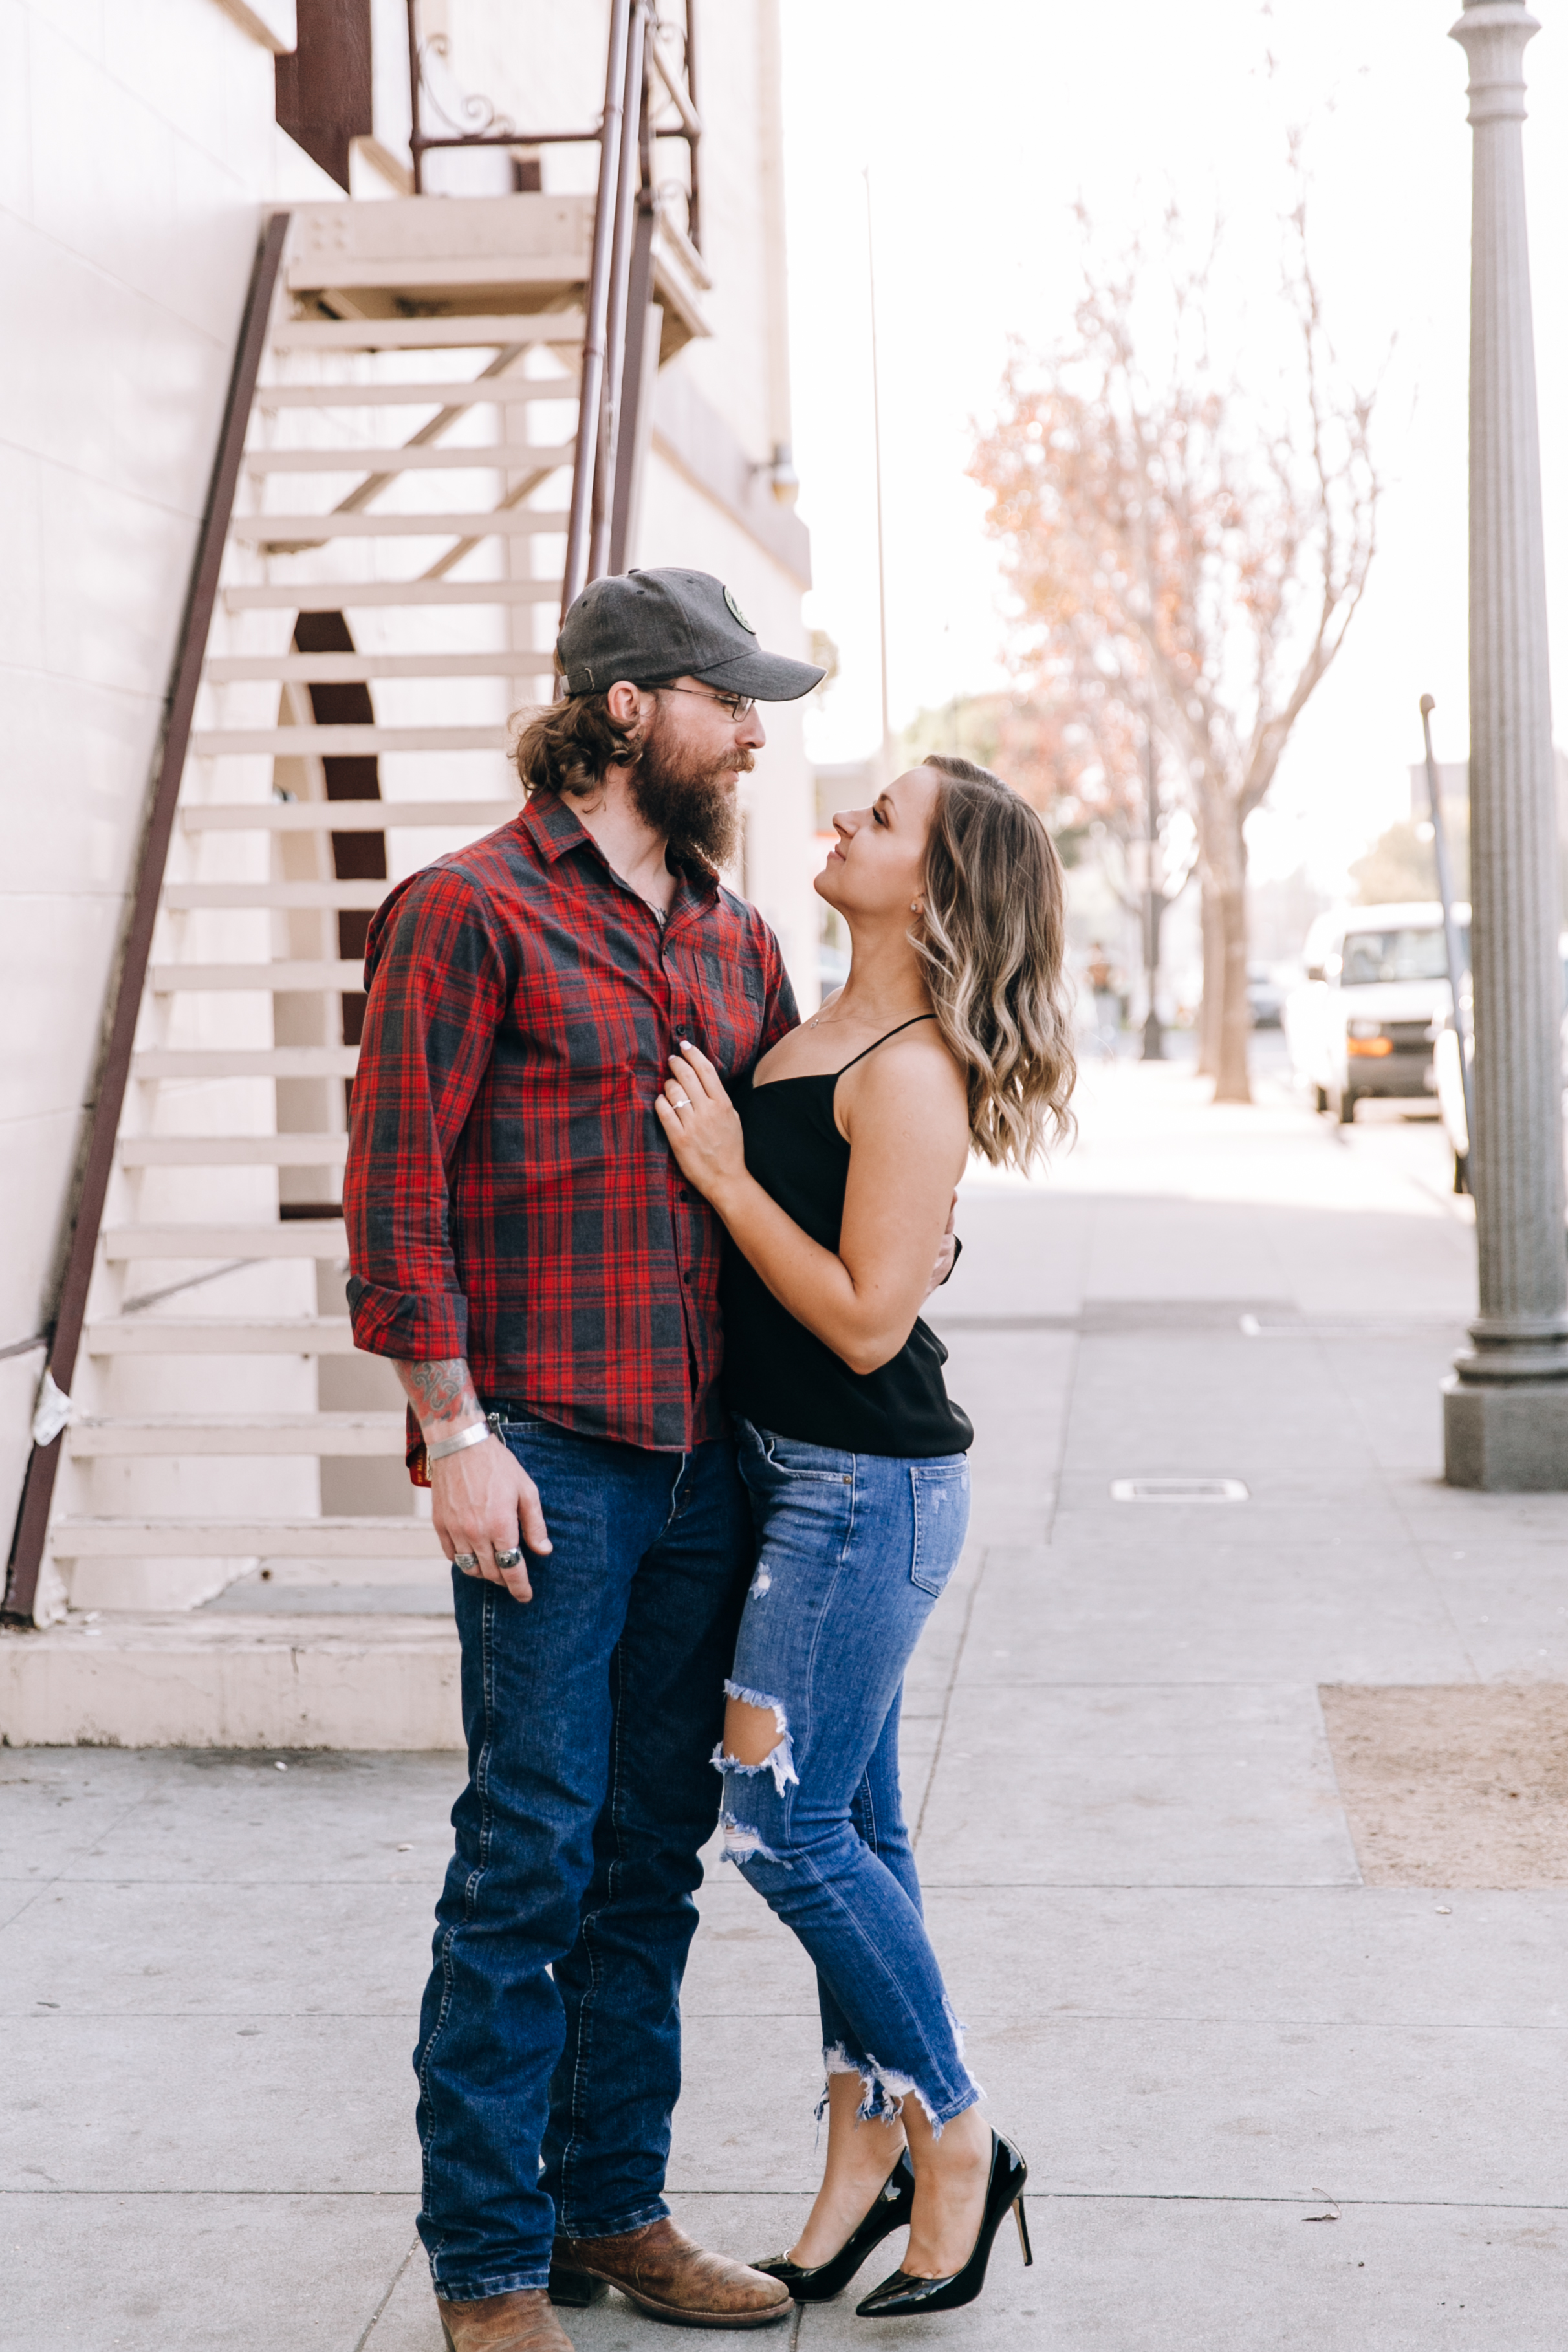 SoCal Engagement Photographer, Old Town Orange Engagement Photographer, OC Engagement Photographer, Orange County Engagement Photographer, OC Engagement Photographer, Orange Engagement Photographer